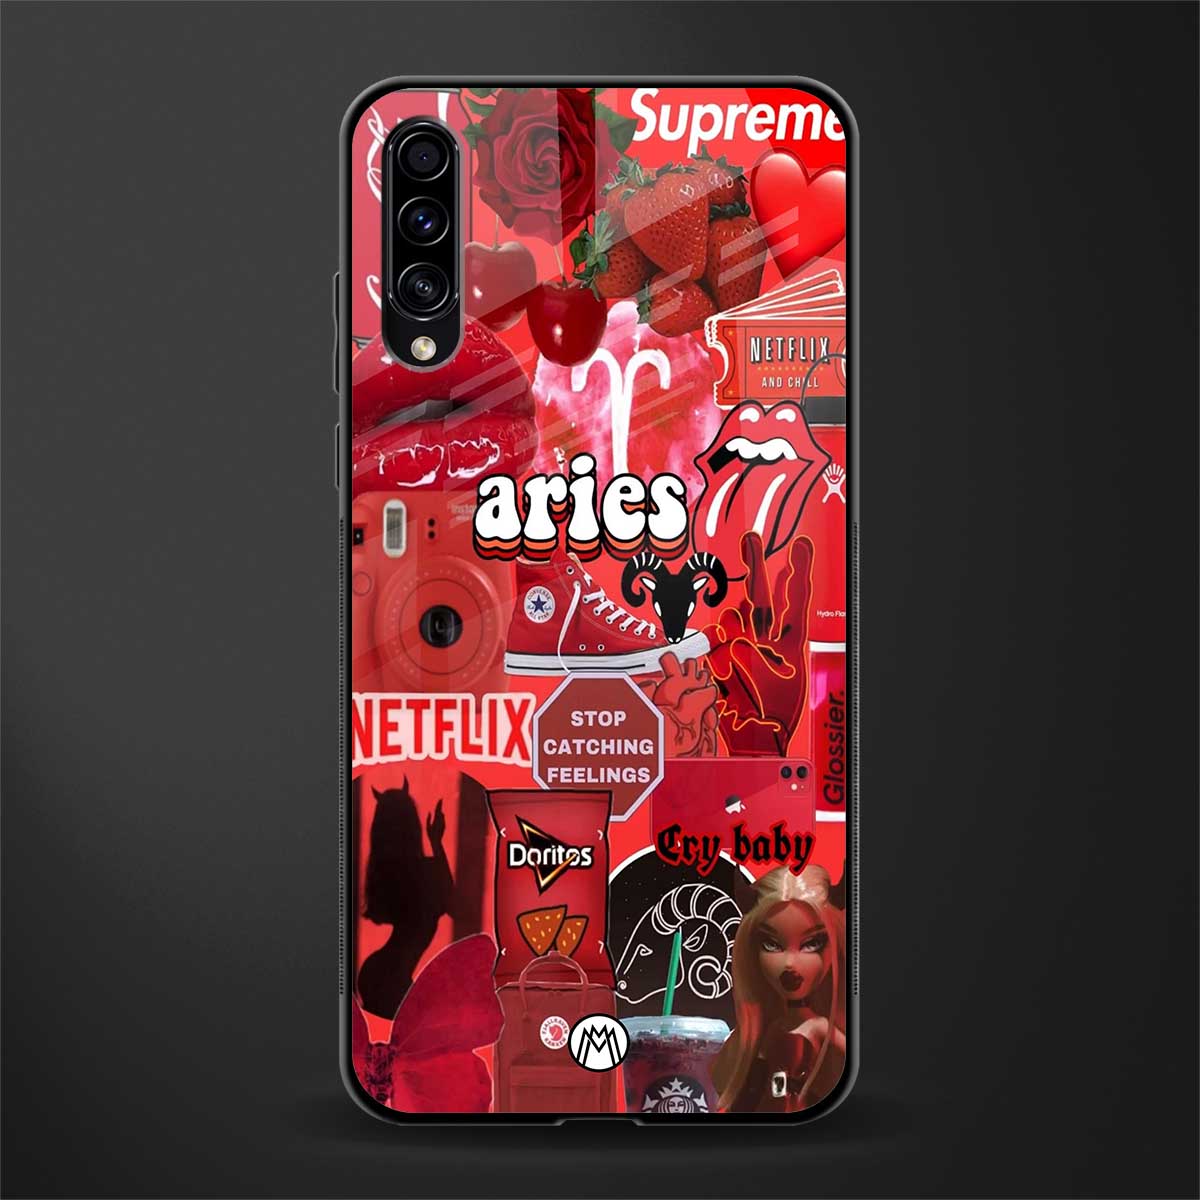 aries aesthetic collage glass case for samsung galaxy a50 image